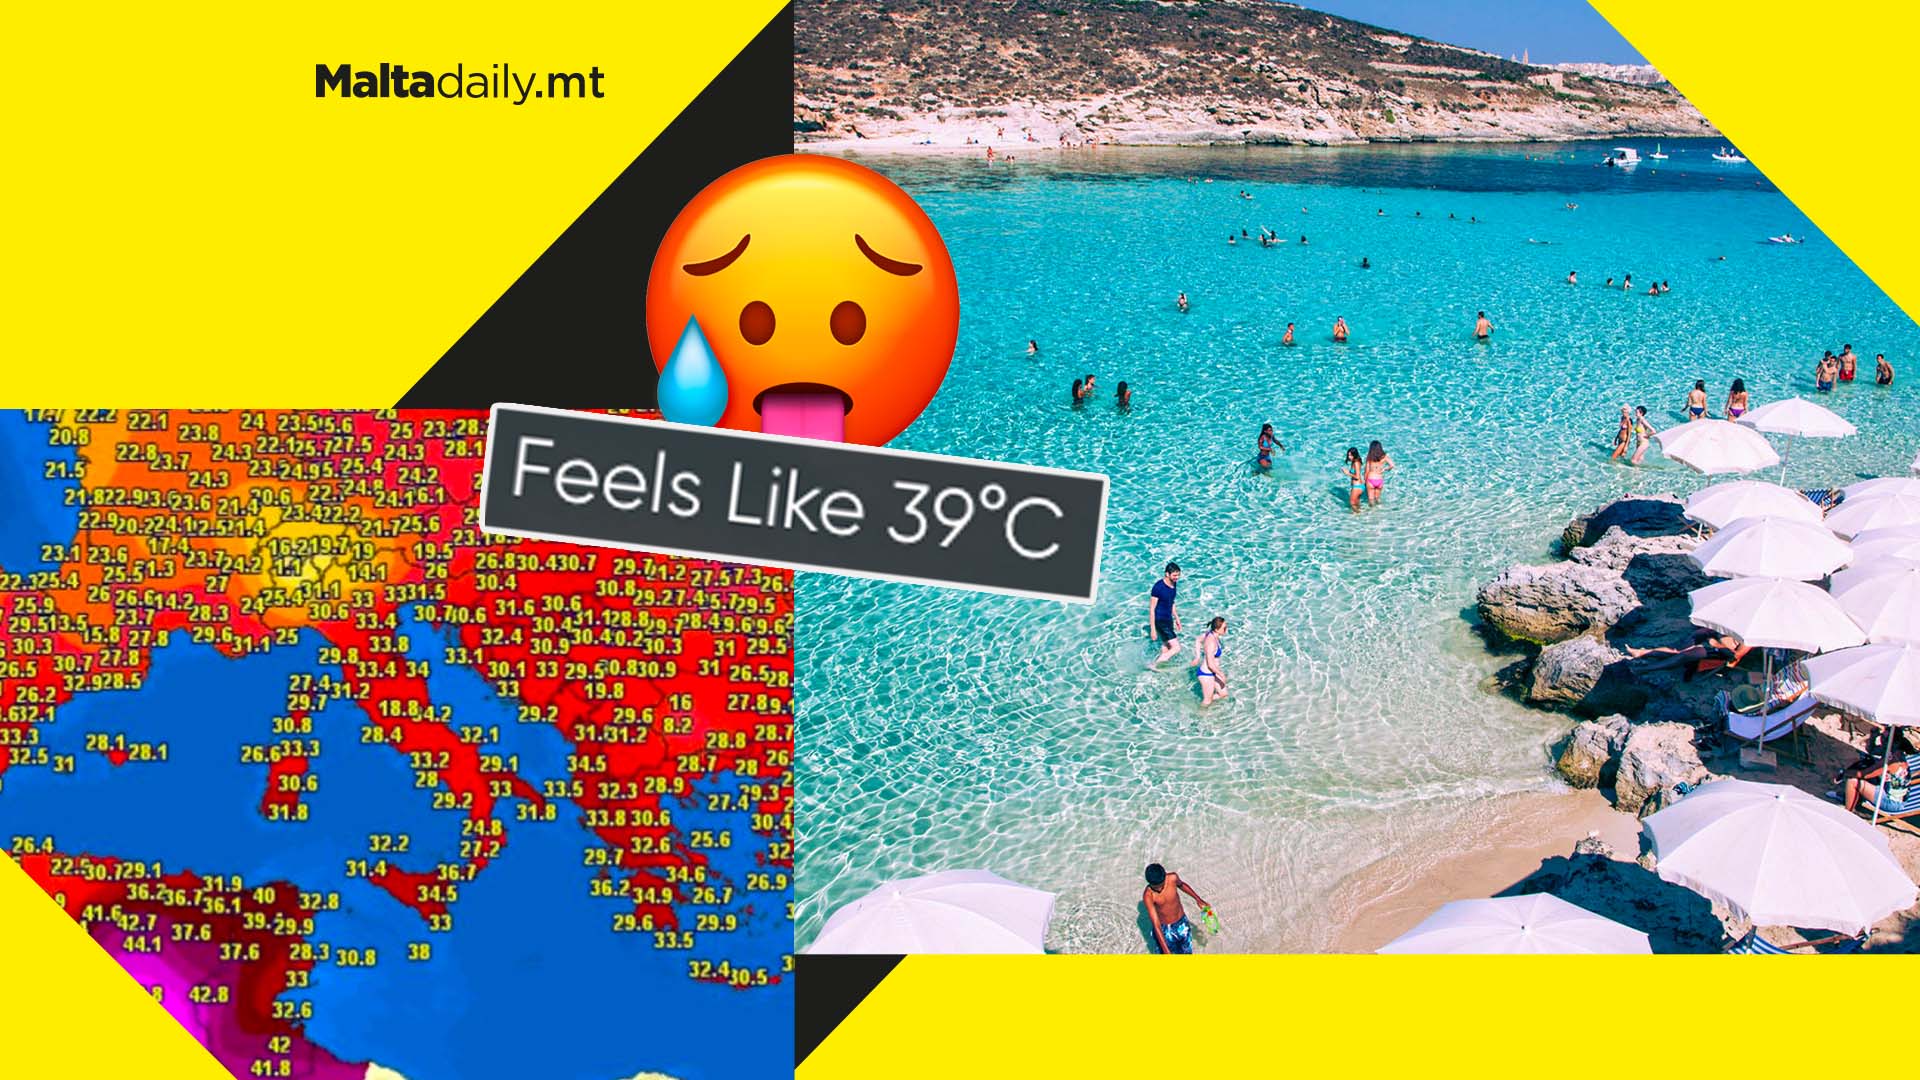 Malta was the hottest place in Europe yesterday as heat wave persists